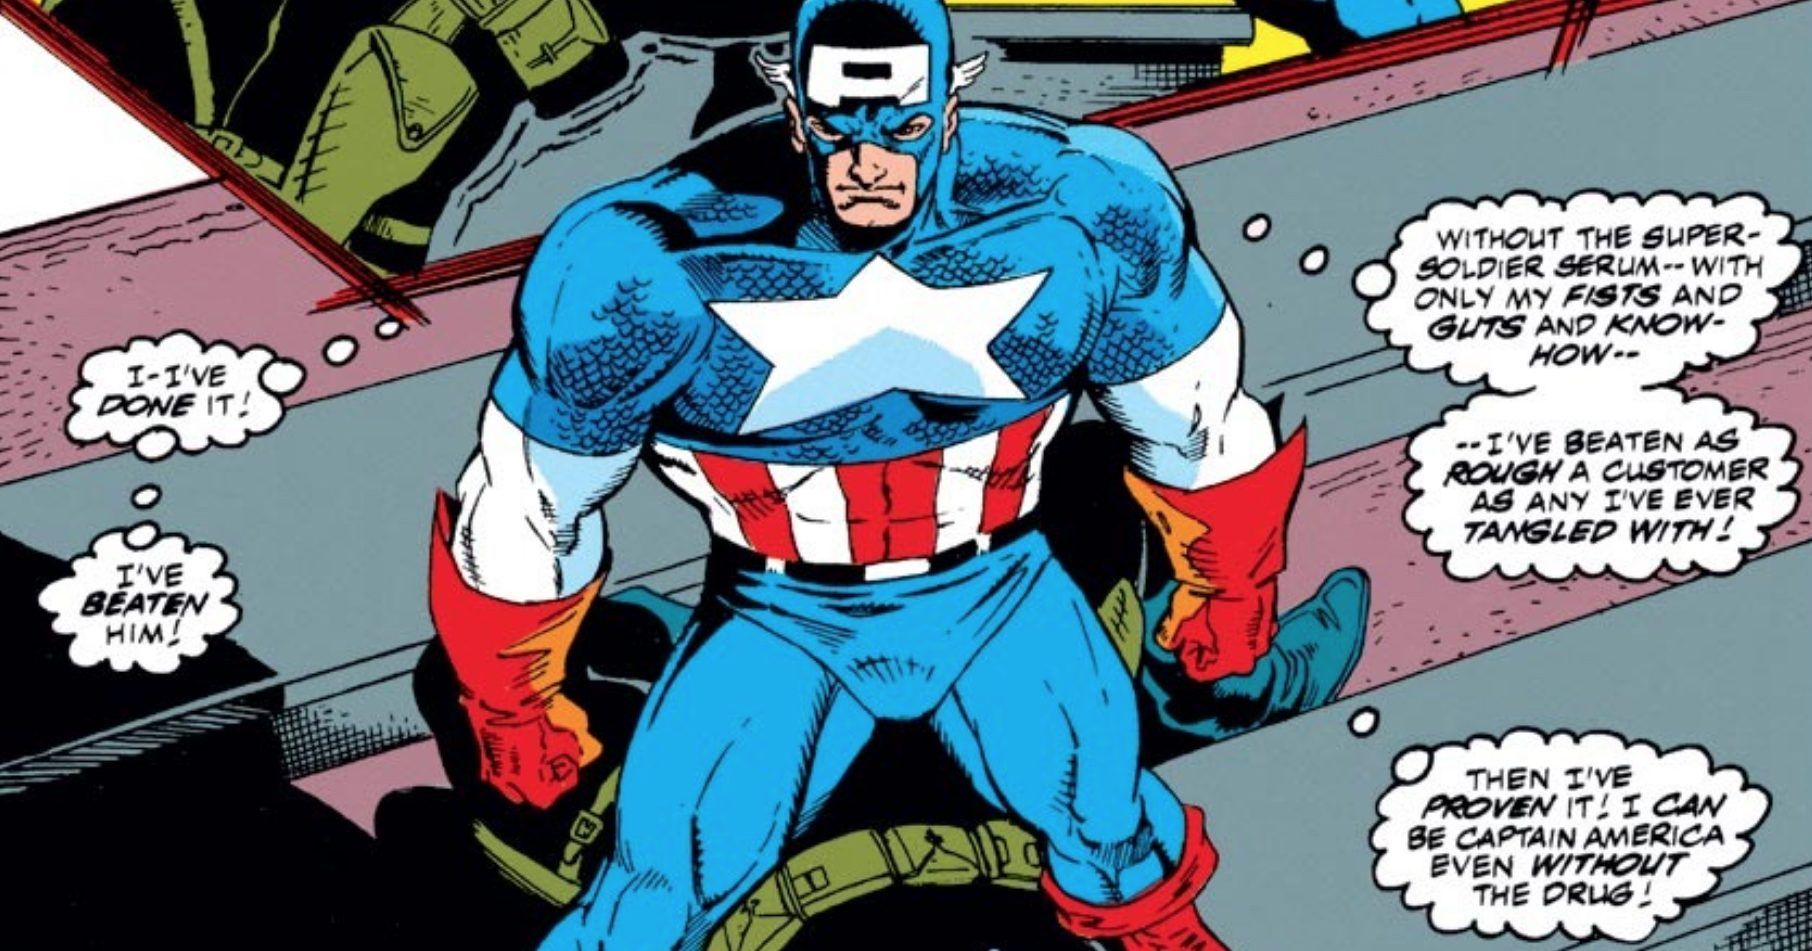 Captain America Beats Crossbones Without the Serum in Isue 378